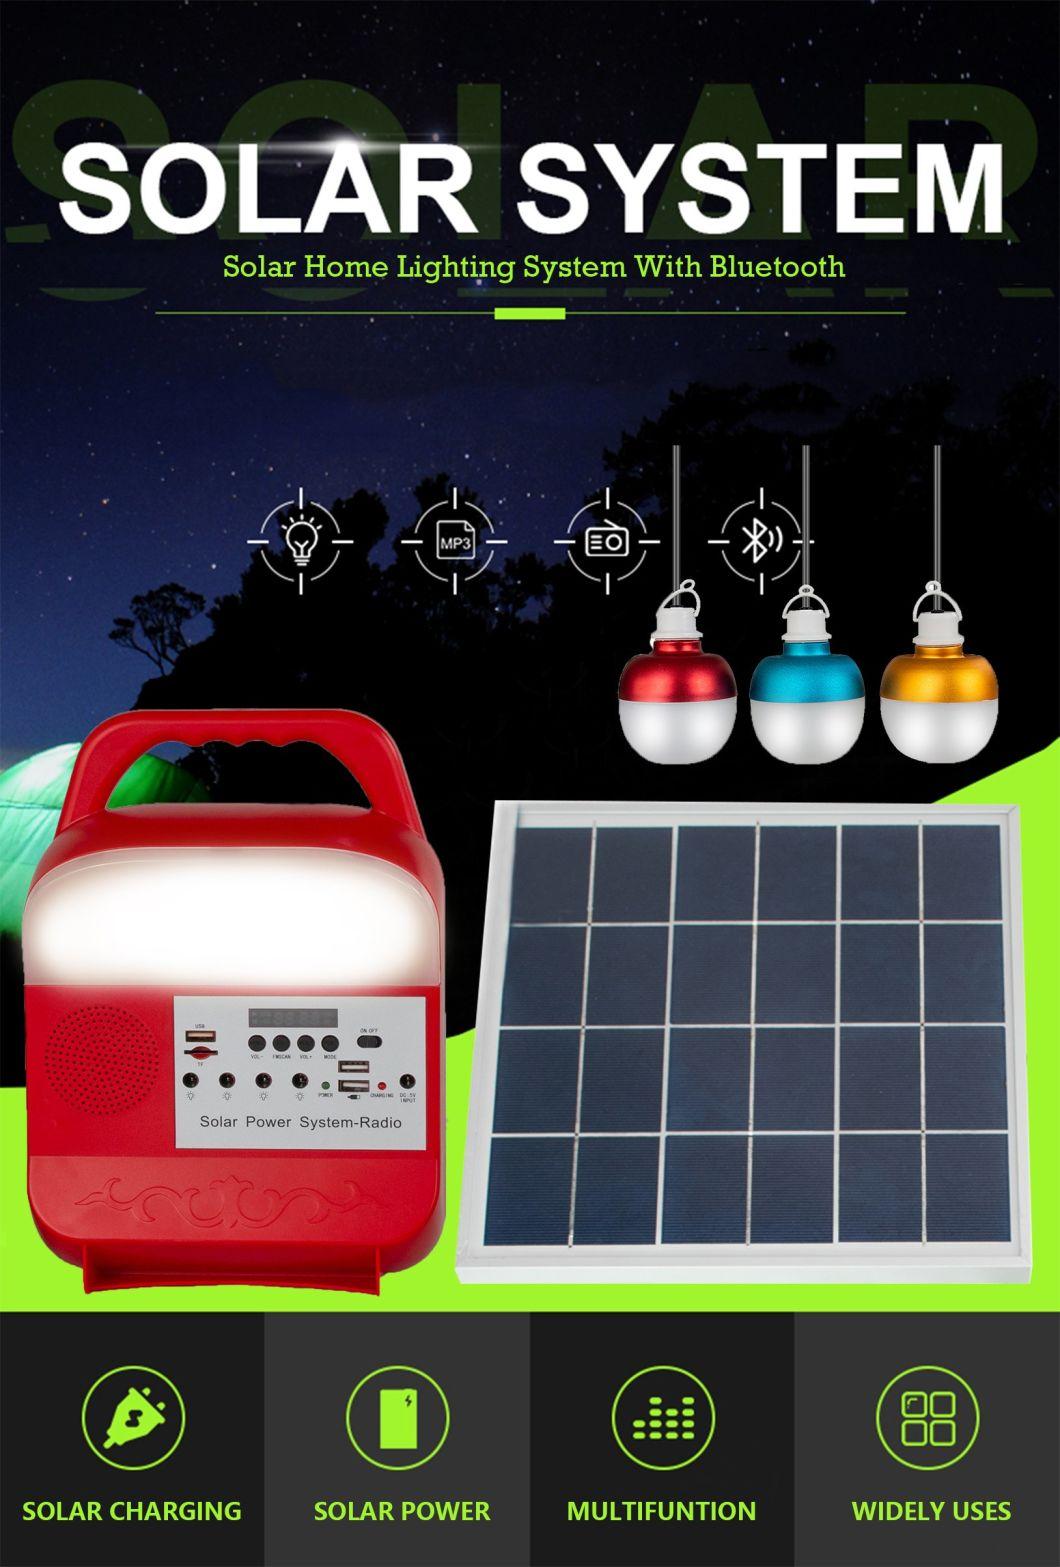 Hot Sale Solar Home Lighting System with Bluetooth